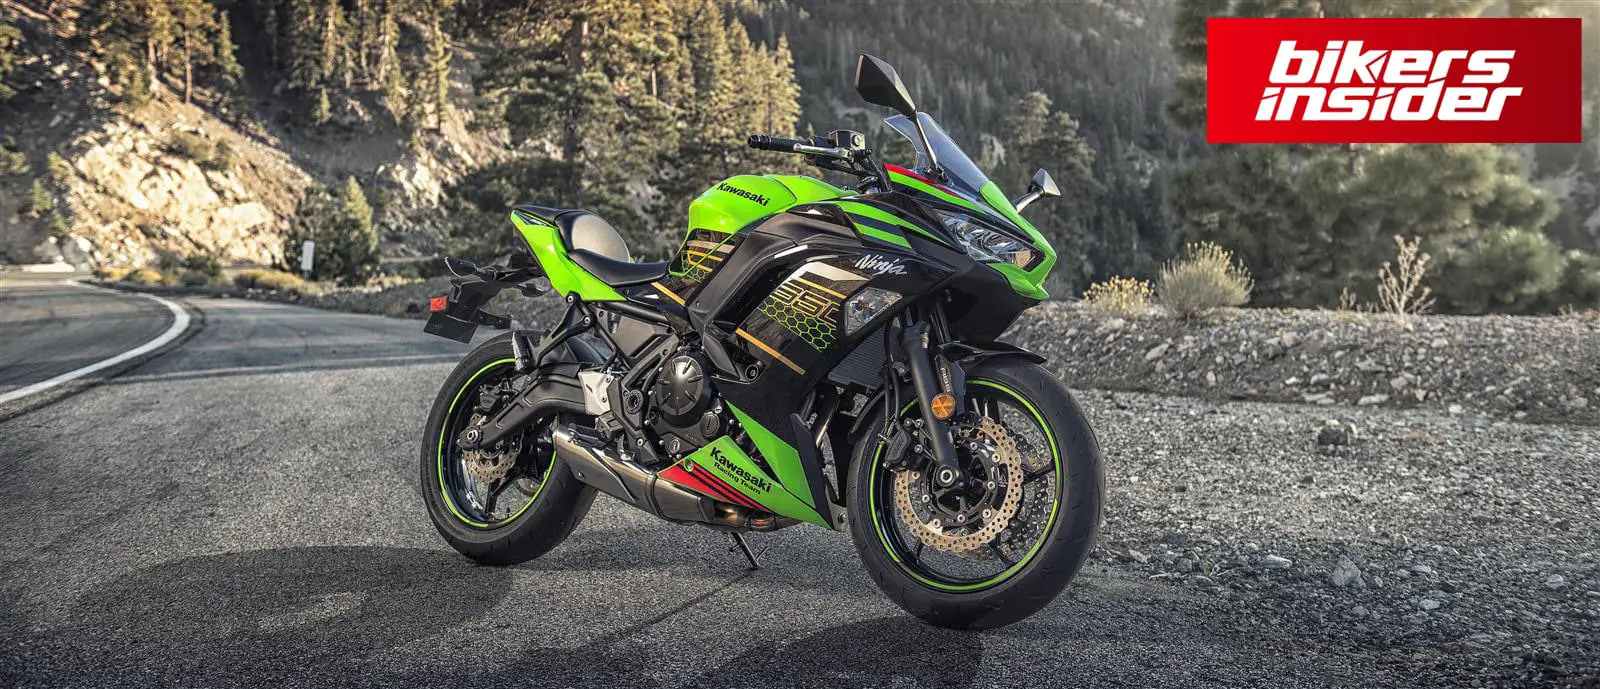 prices and specs revealed for the new 2020 kawasaki ninja 650